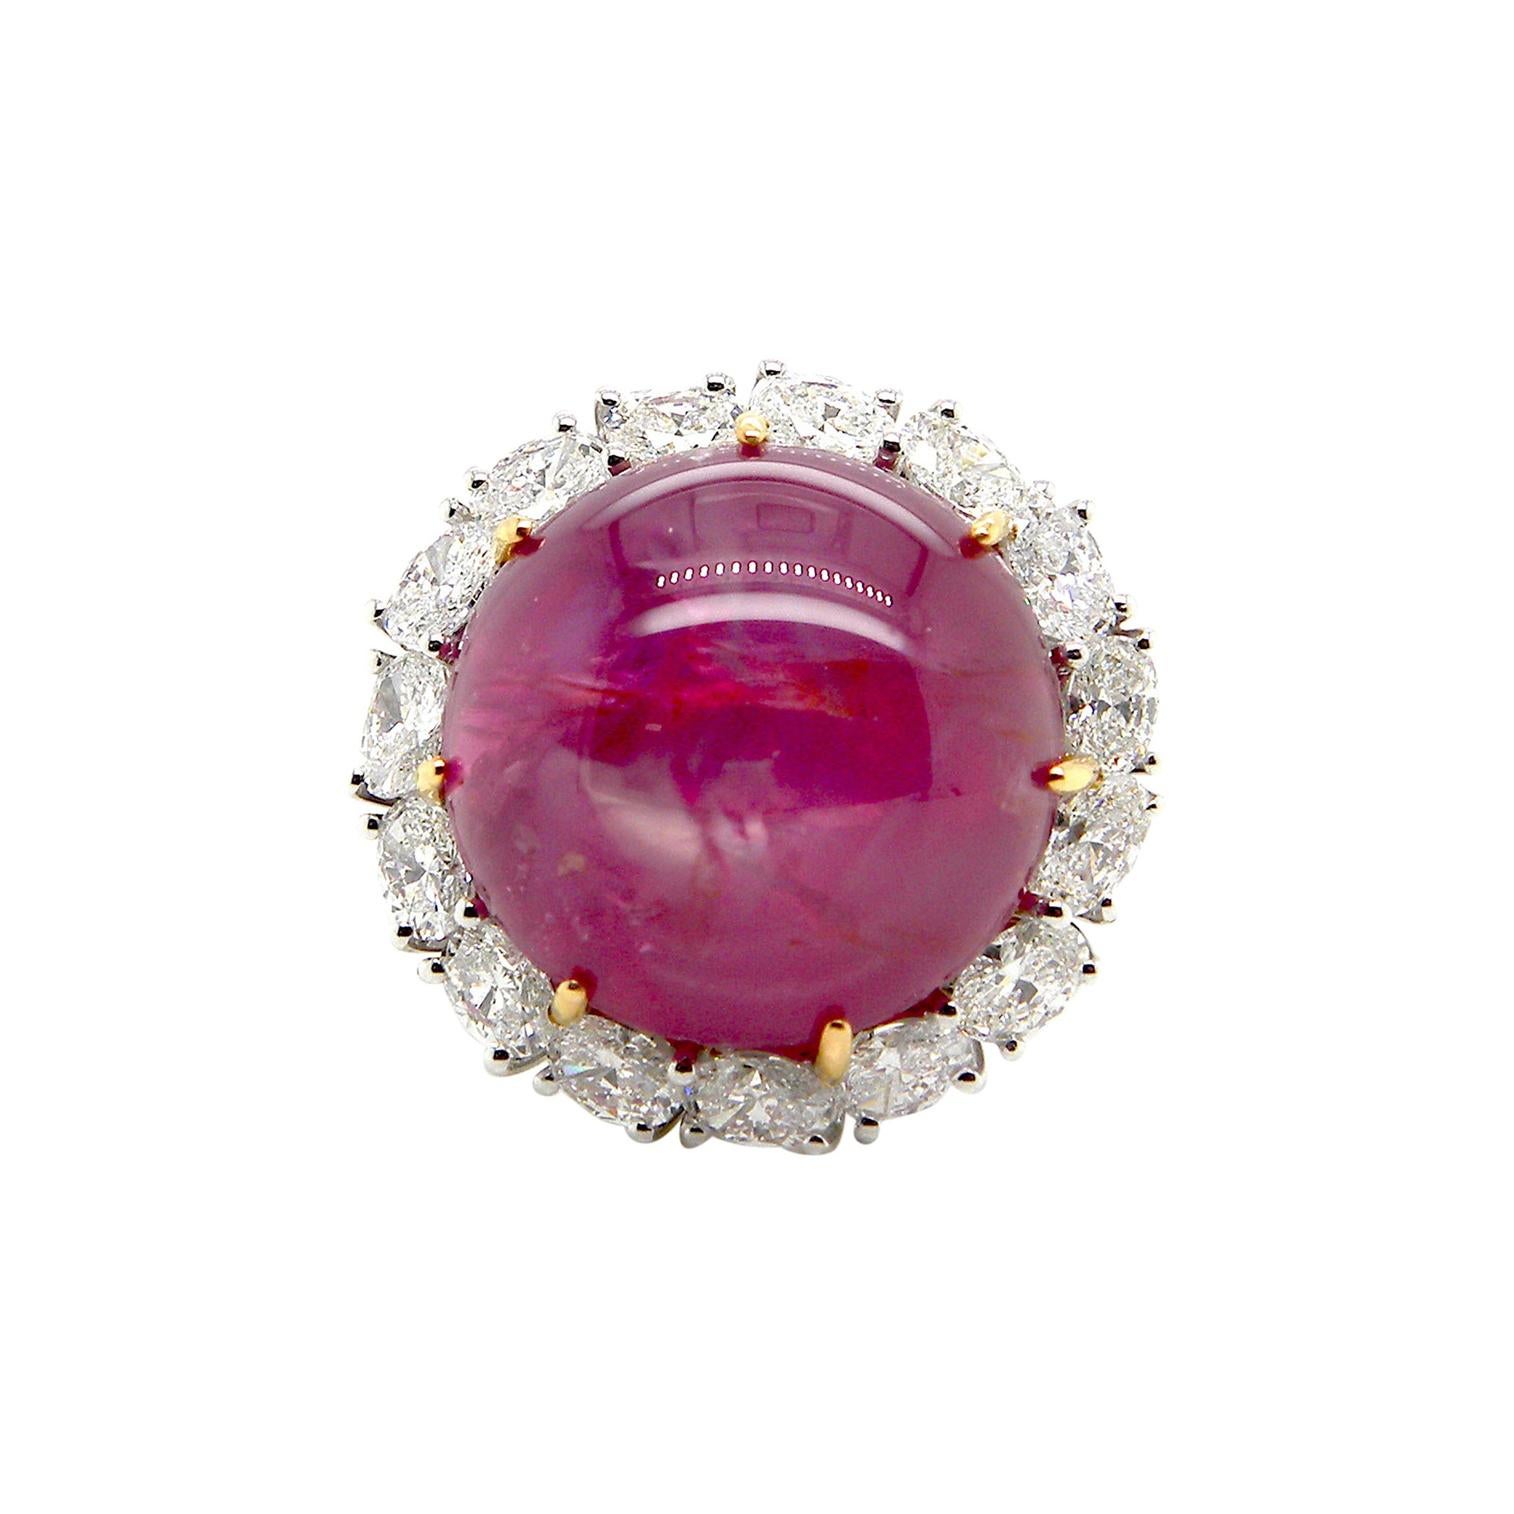 25.89 Carat GRS Certified Unheated Burmese Star Ruby and White Diamond Ring:

An extremely rare ring, it features an exquisite unheated Burmese red star ruby weighing 25.89 carat, with a halo of super white oval diamonds weighing a total of 1.6